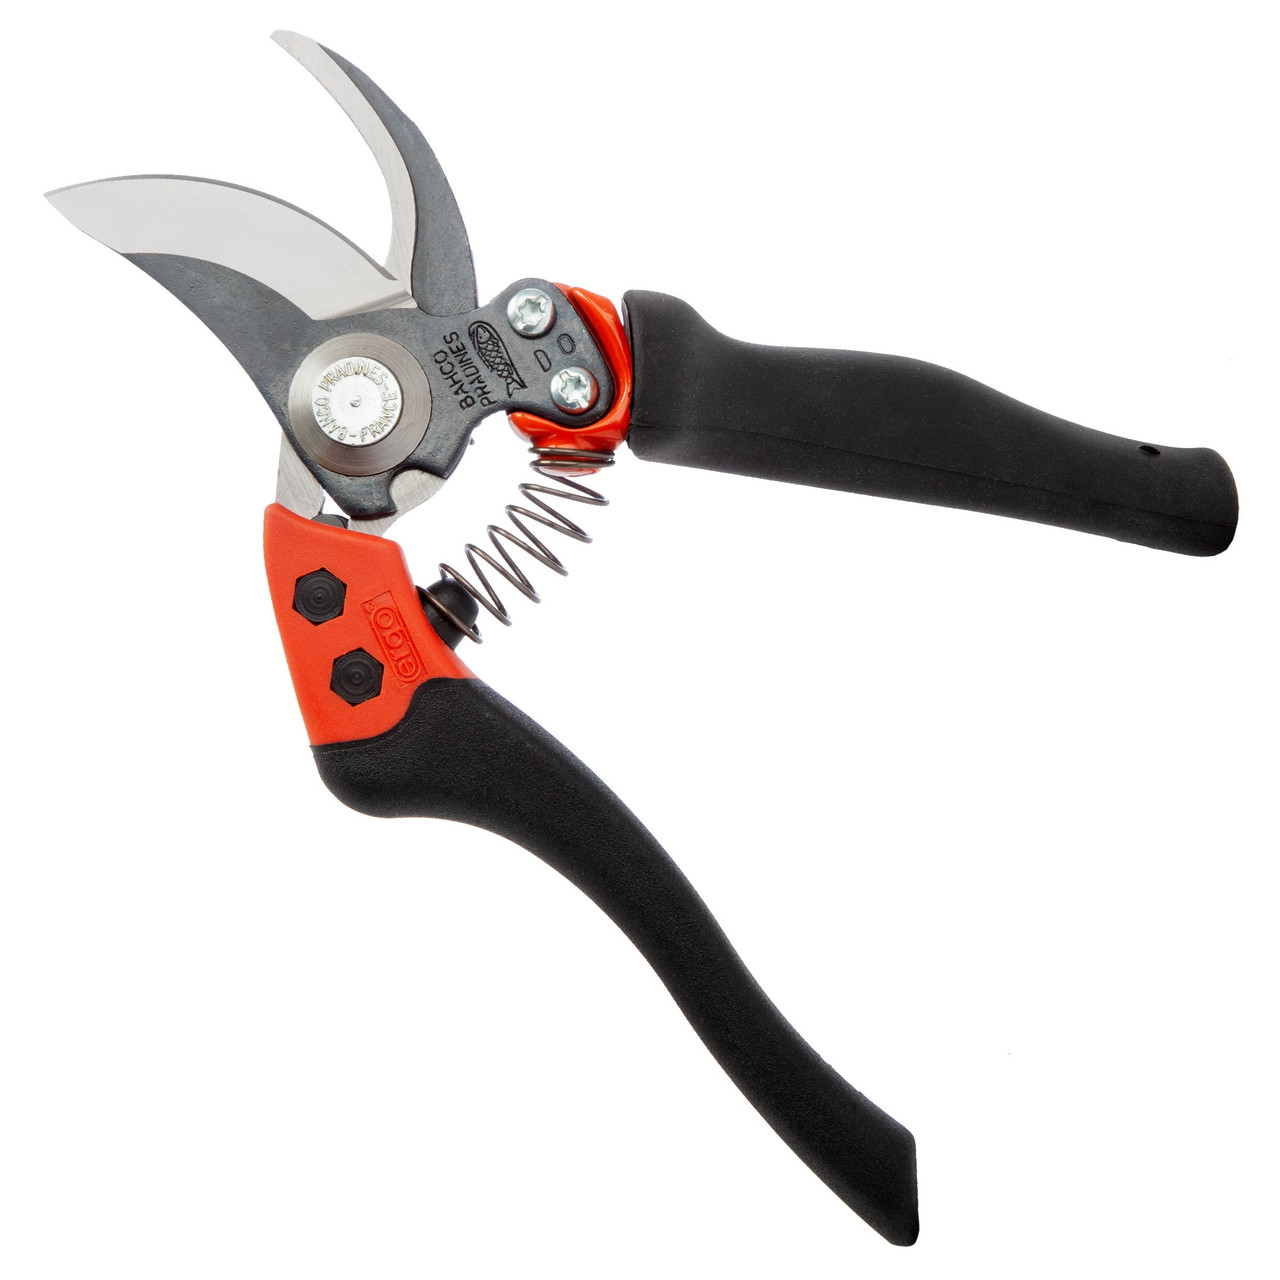 Bahco PXR-L2 Bypass Secateurs 20mm Capacity (L) Toolstop